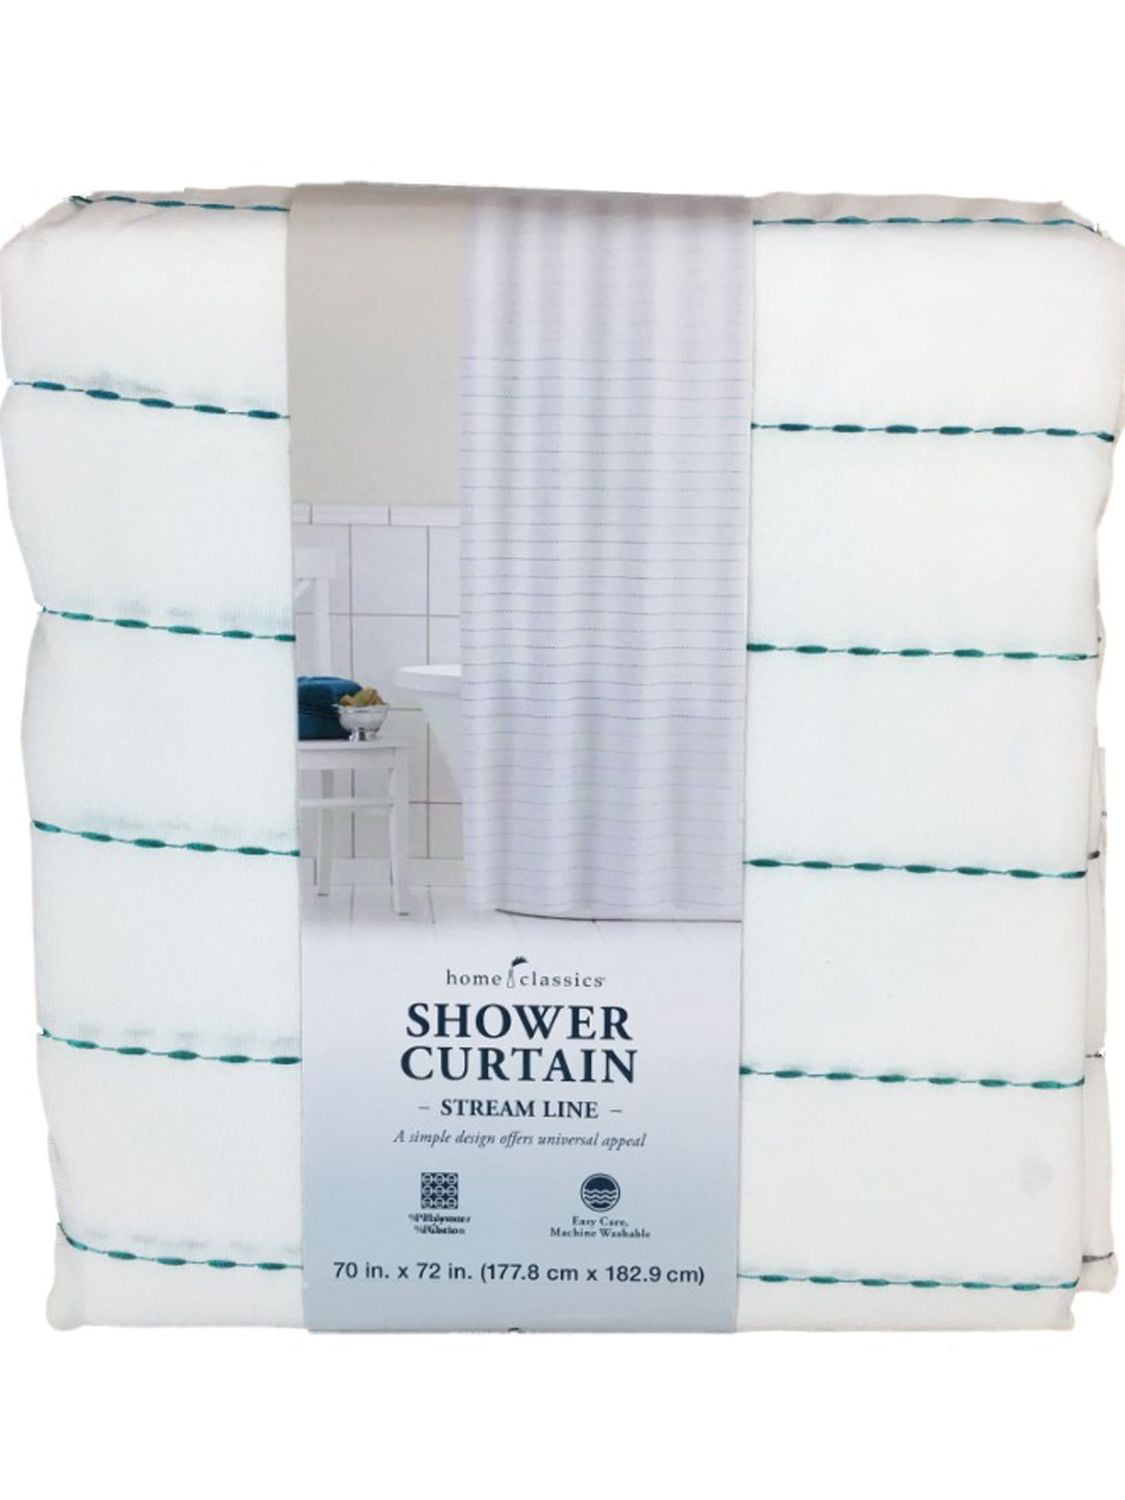 Home Classics Teal Blue Embroidered, Home Classics Ruffle Ombre Fabric Shower Curtain